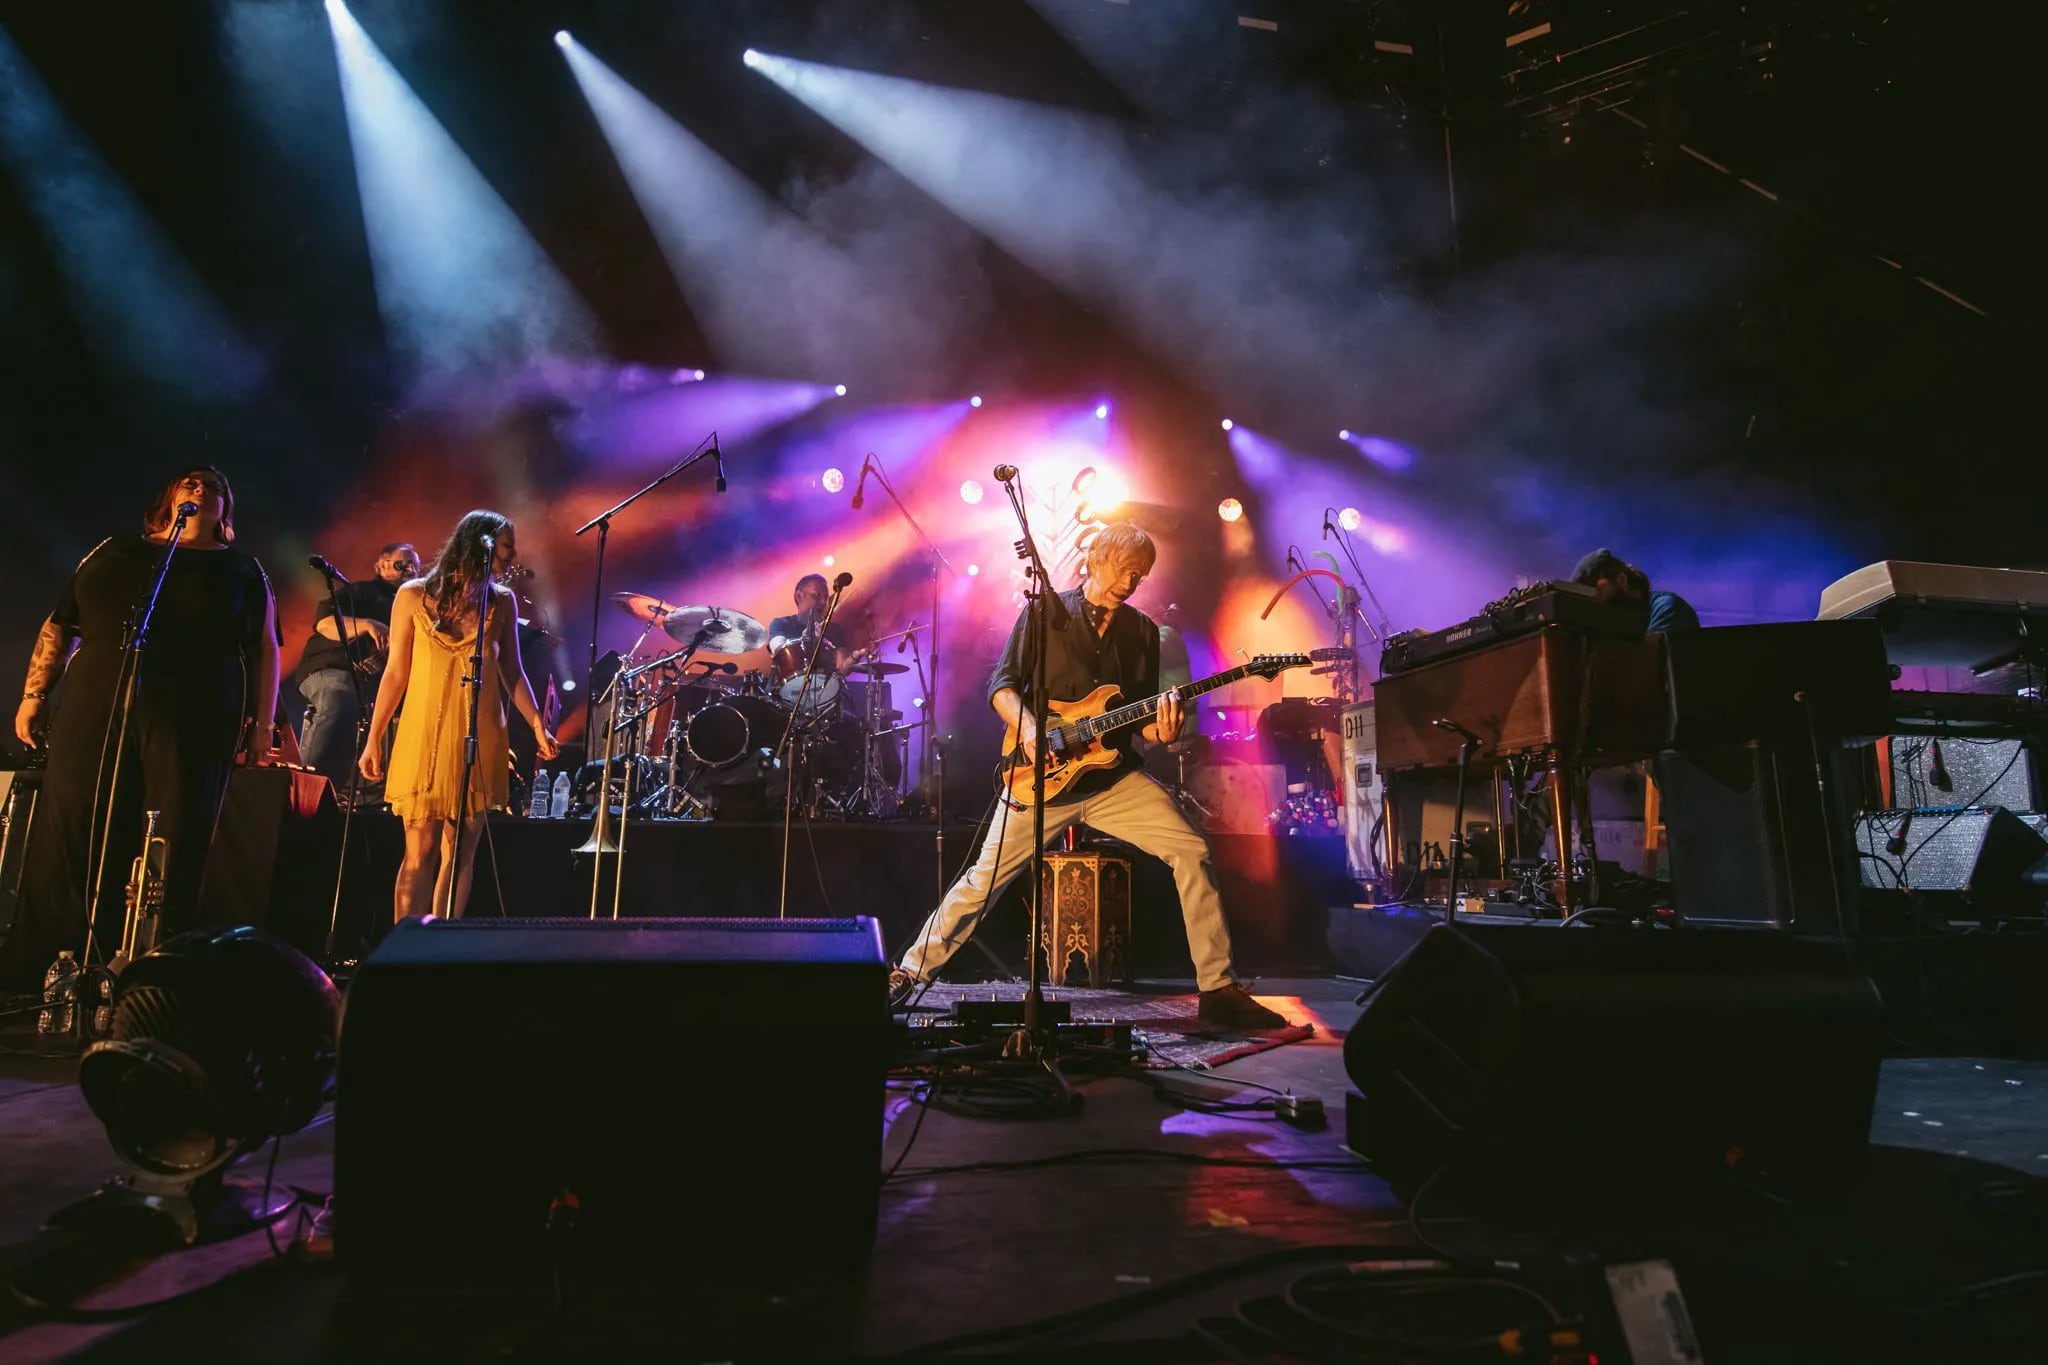 The Trey Anastasio Band at the Peach Music Festival in 2019, with singers Jennifer Hartswick and Natalie Cressman and Anastasio on guitar. The 2023 rendition is set for June 29-July 2, 2023 in Scranton. 